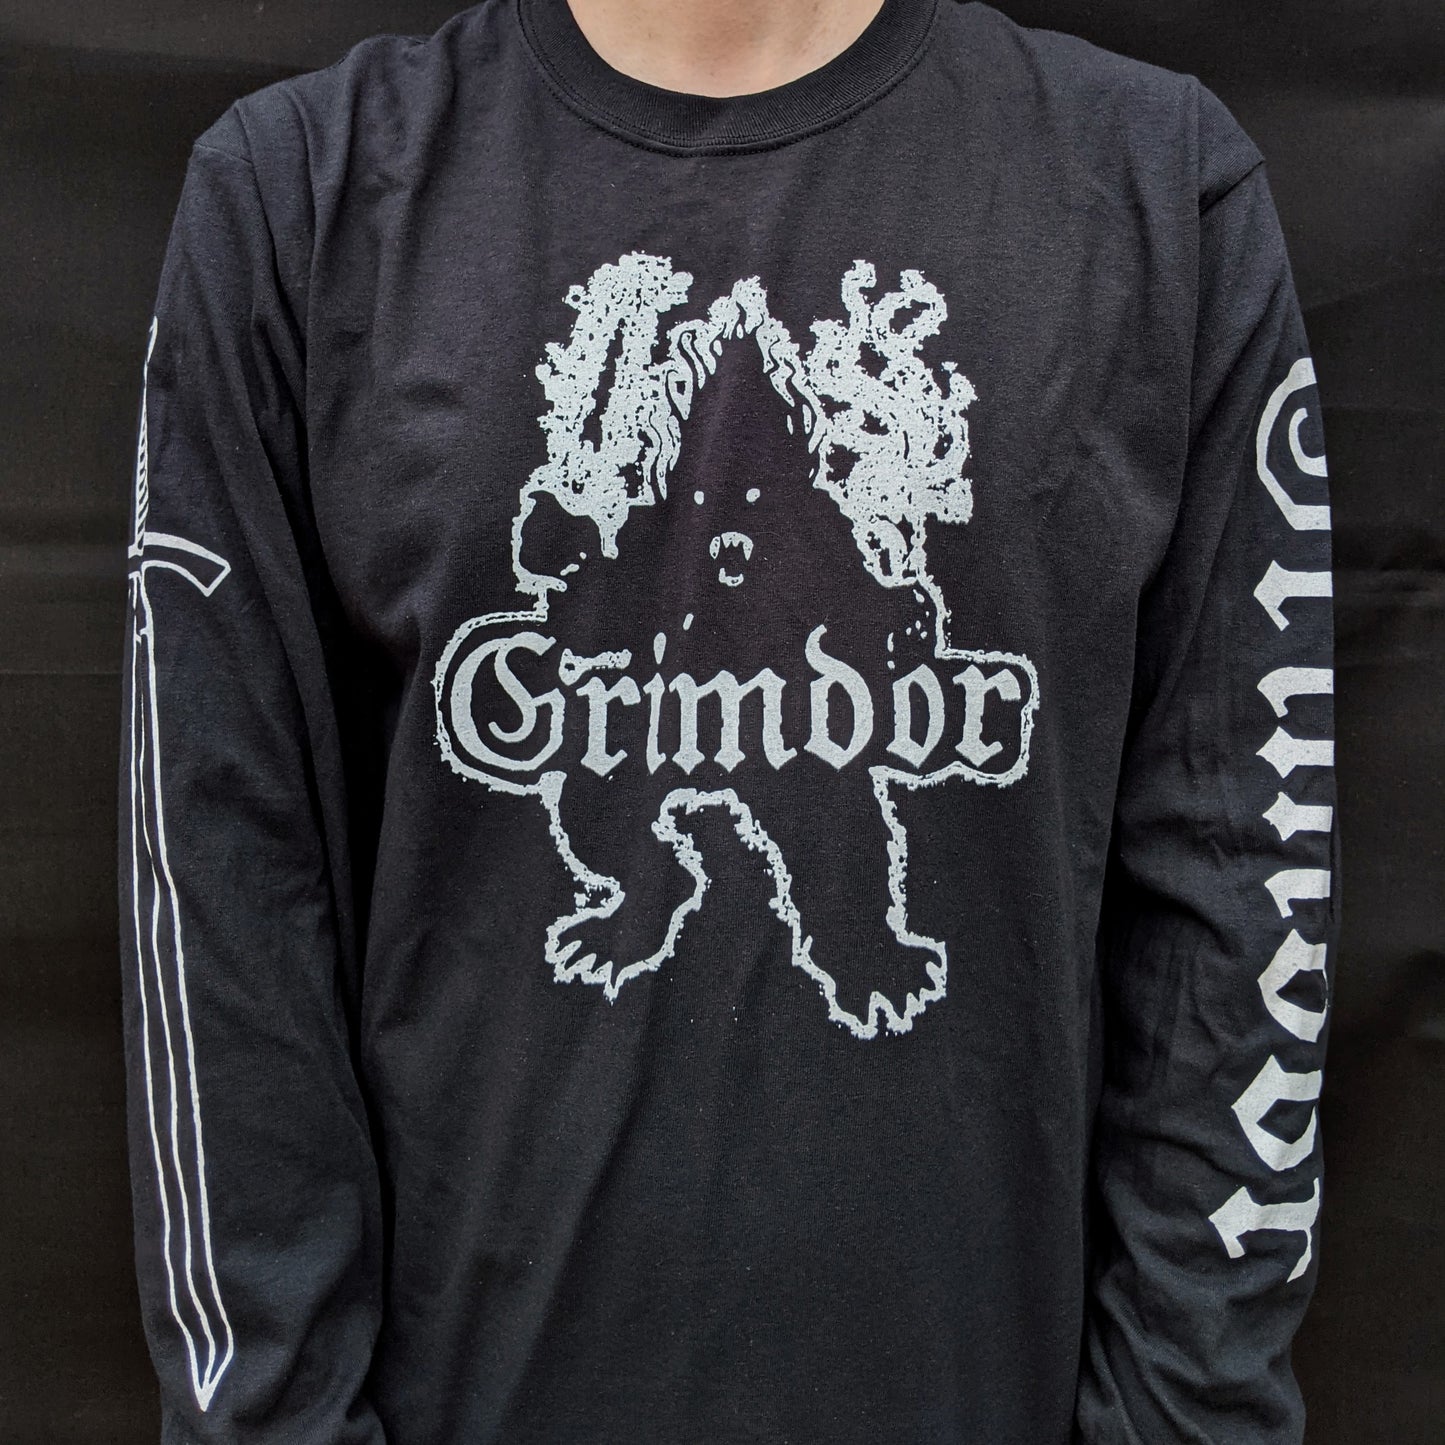 [SOLD OUT] GRIMDOR "Shadow of the Past" 4-Sided Long Sleeve Shirt [BLACK]